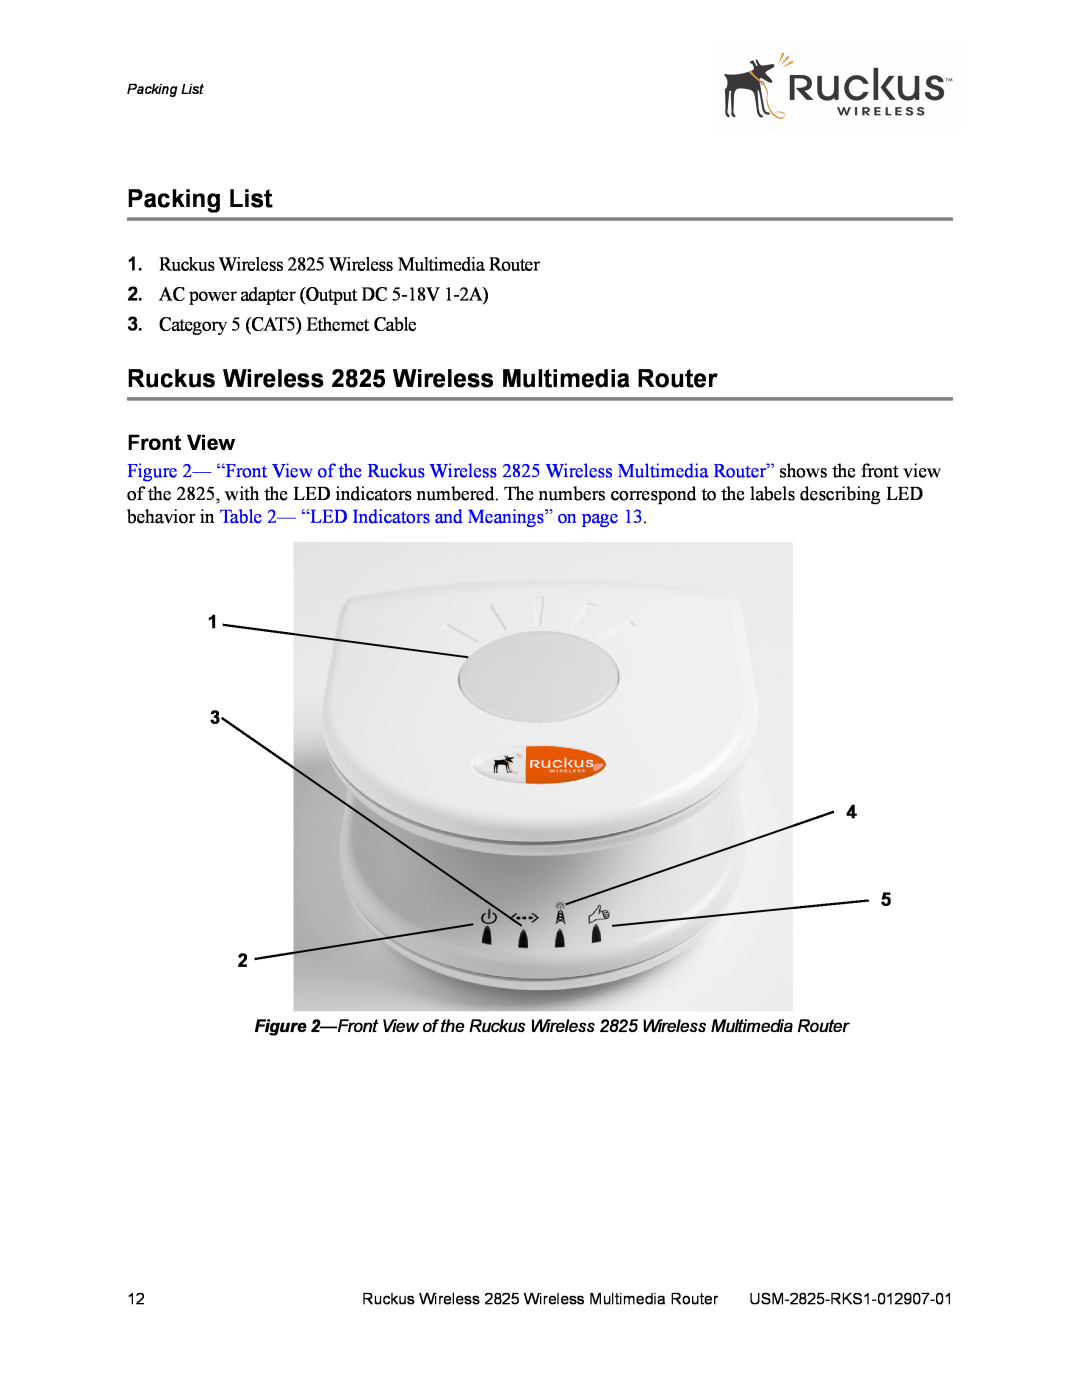 Ruckus Wireless 2111 manual Packing List, Ruckus Wireless 2825 Wireless Multimedia Router, Front View 